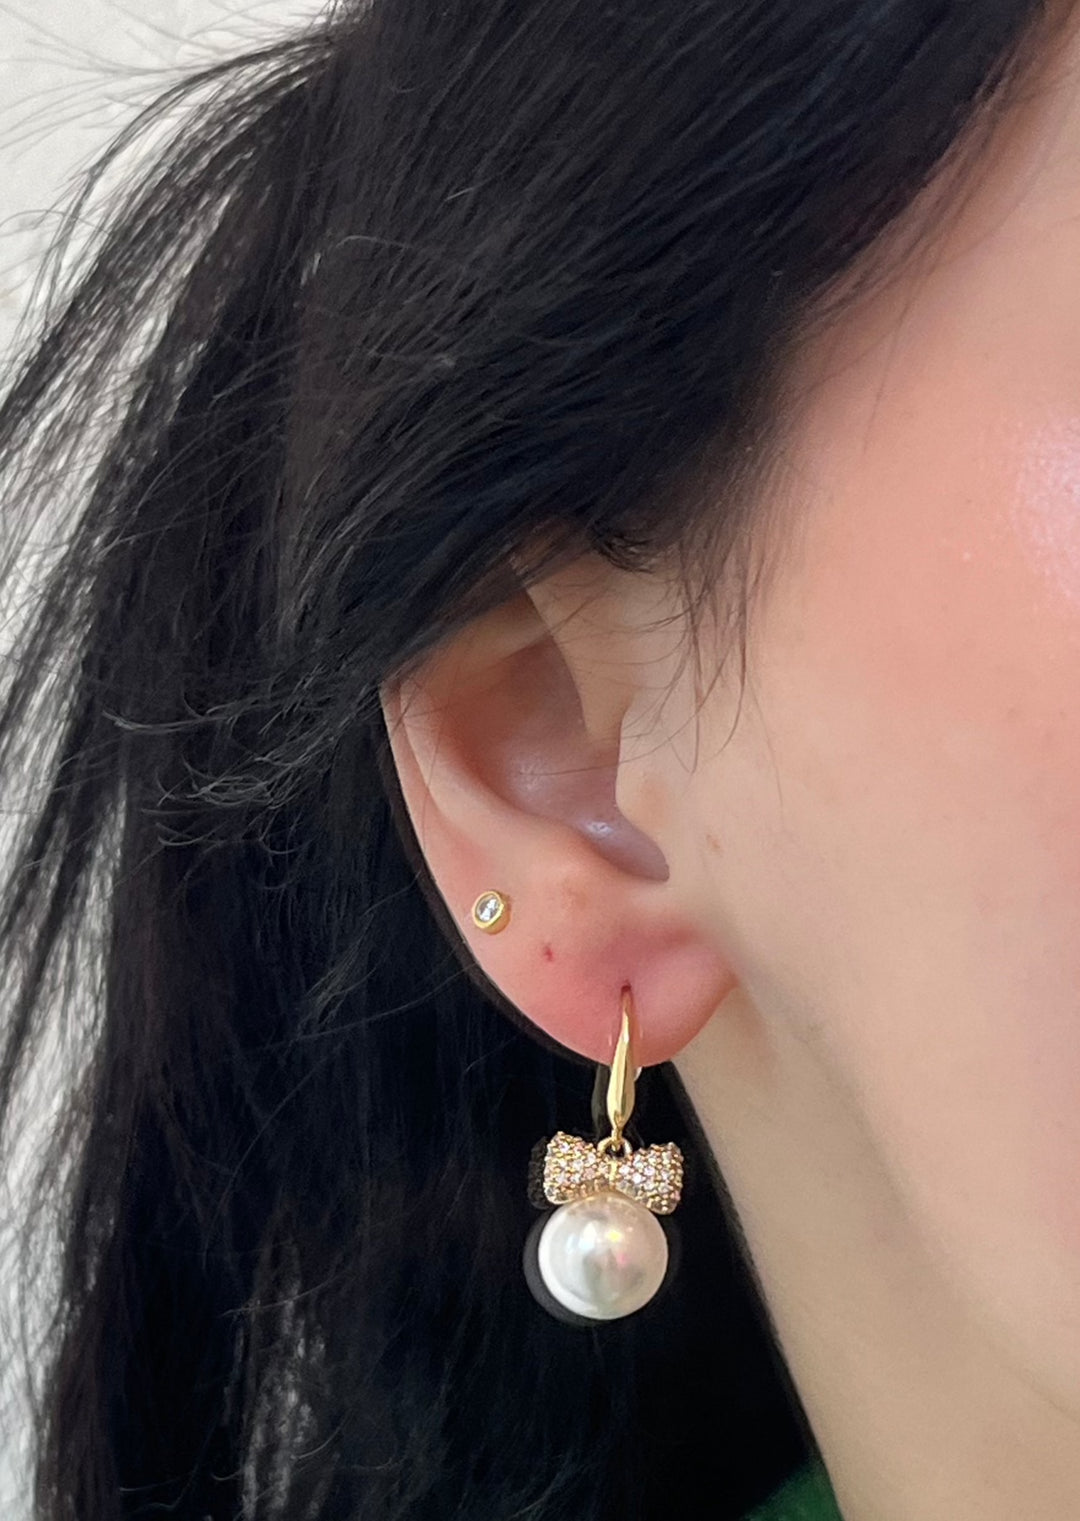 Annabelle Pearl & Bow Earring, Jewelry, Adeline, Adeline, dallas boutique, dallas texas, texas boutique, women's boutique dallas, adeline boutique, dallas boutique, trendy boutique, affordable boutique